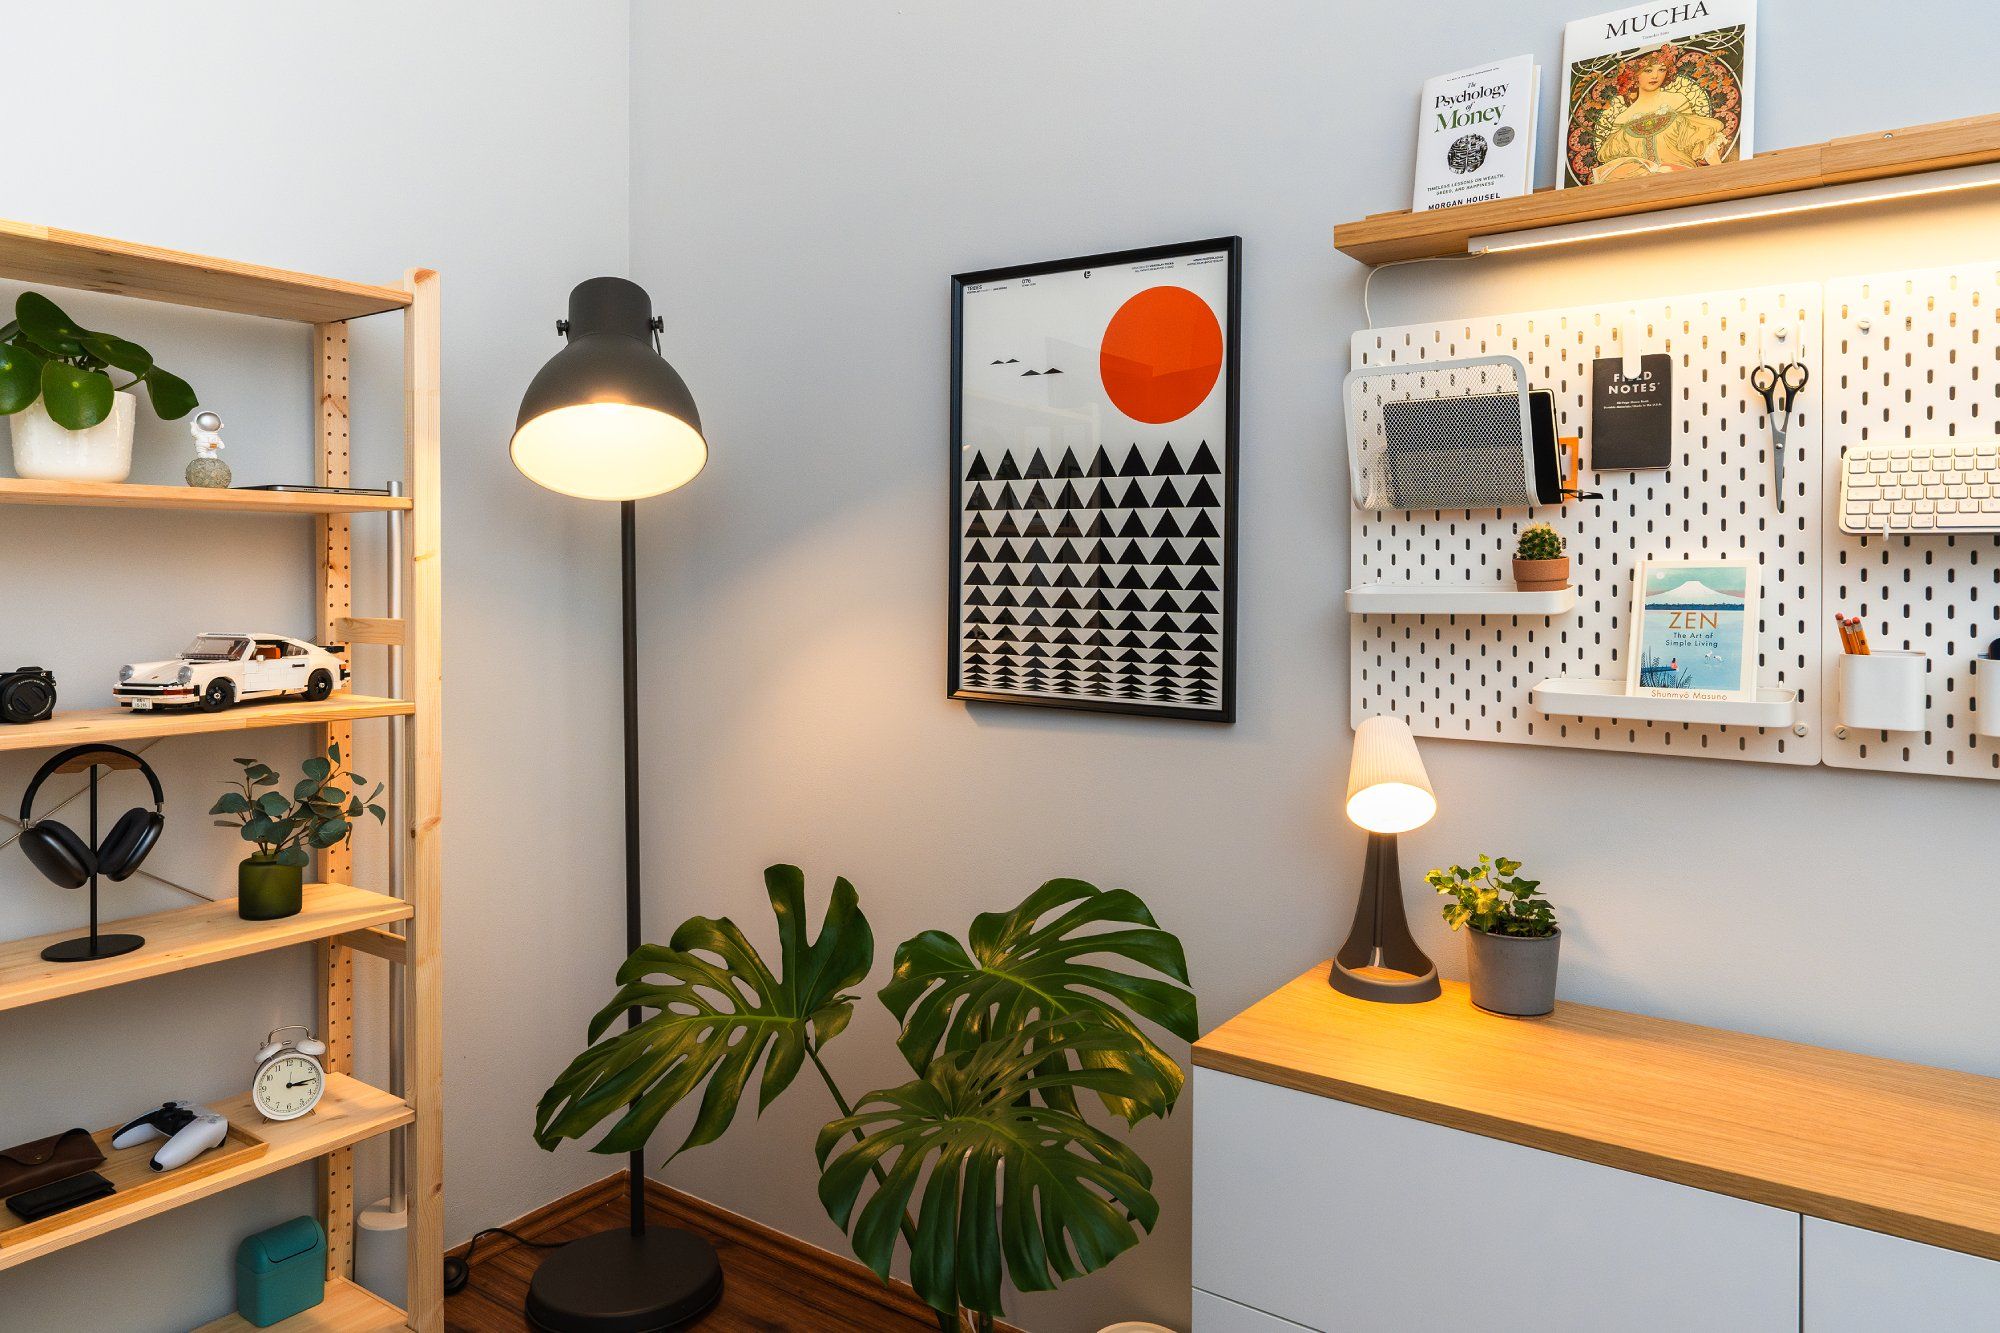 The corner of a home office showcases a bookcase and a Monstera plant, illuminated by an IKEA HEKTAR floor lamp